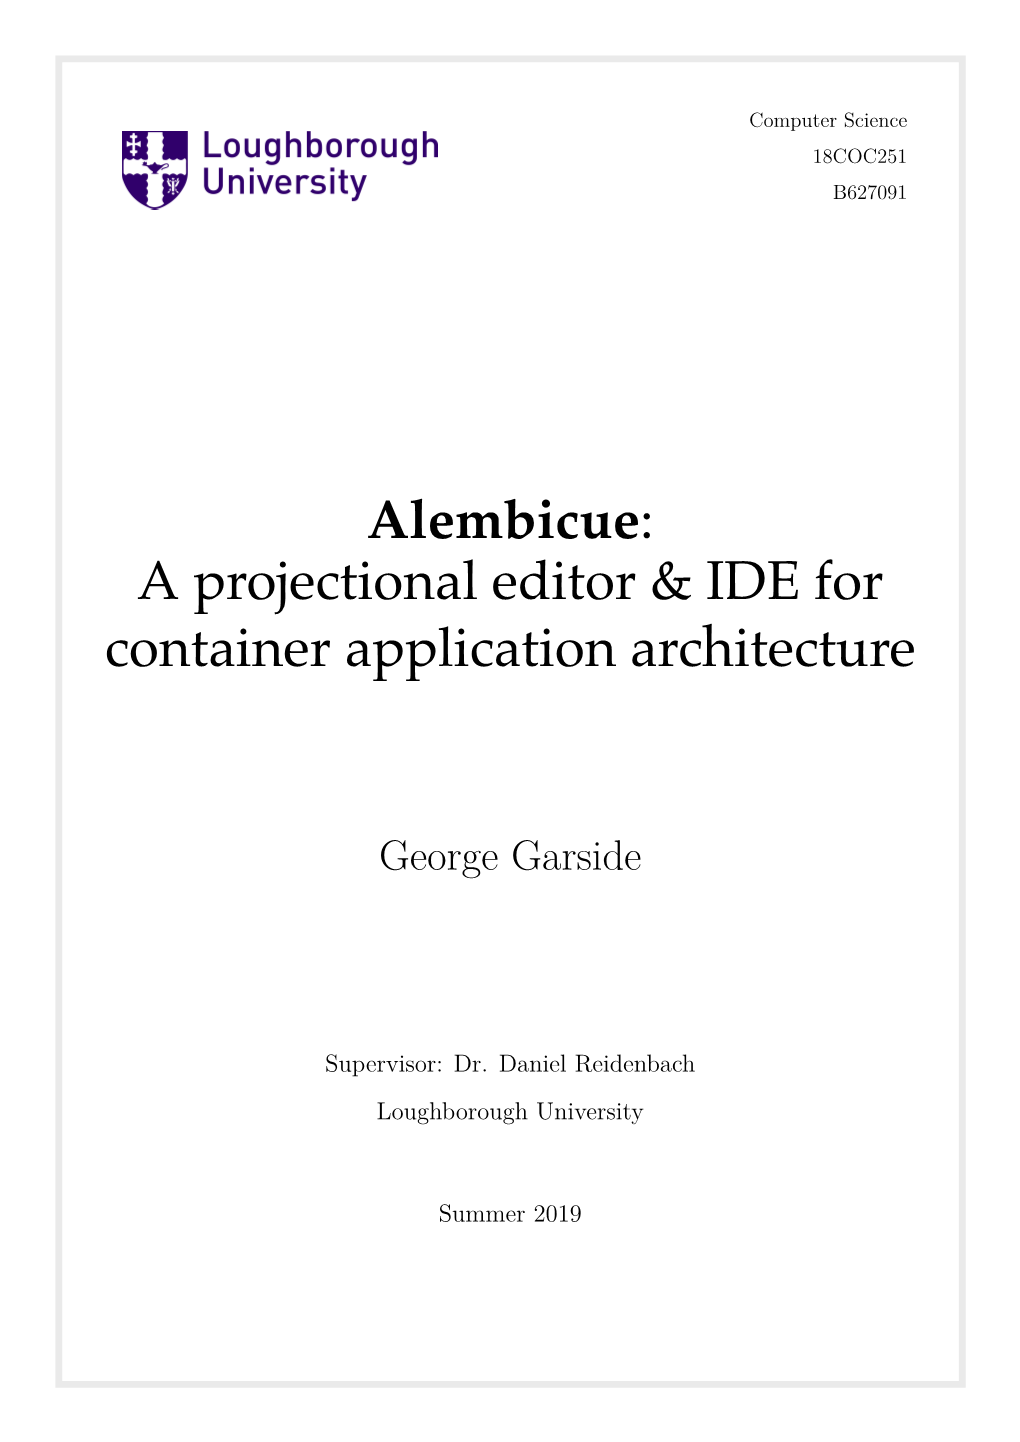 Alembicue: a Projectional Editor & IDE for Container Application Architecture